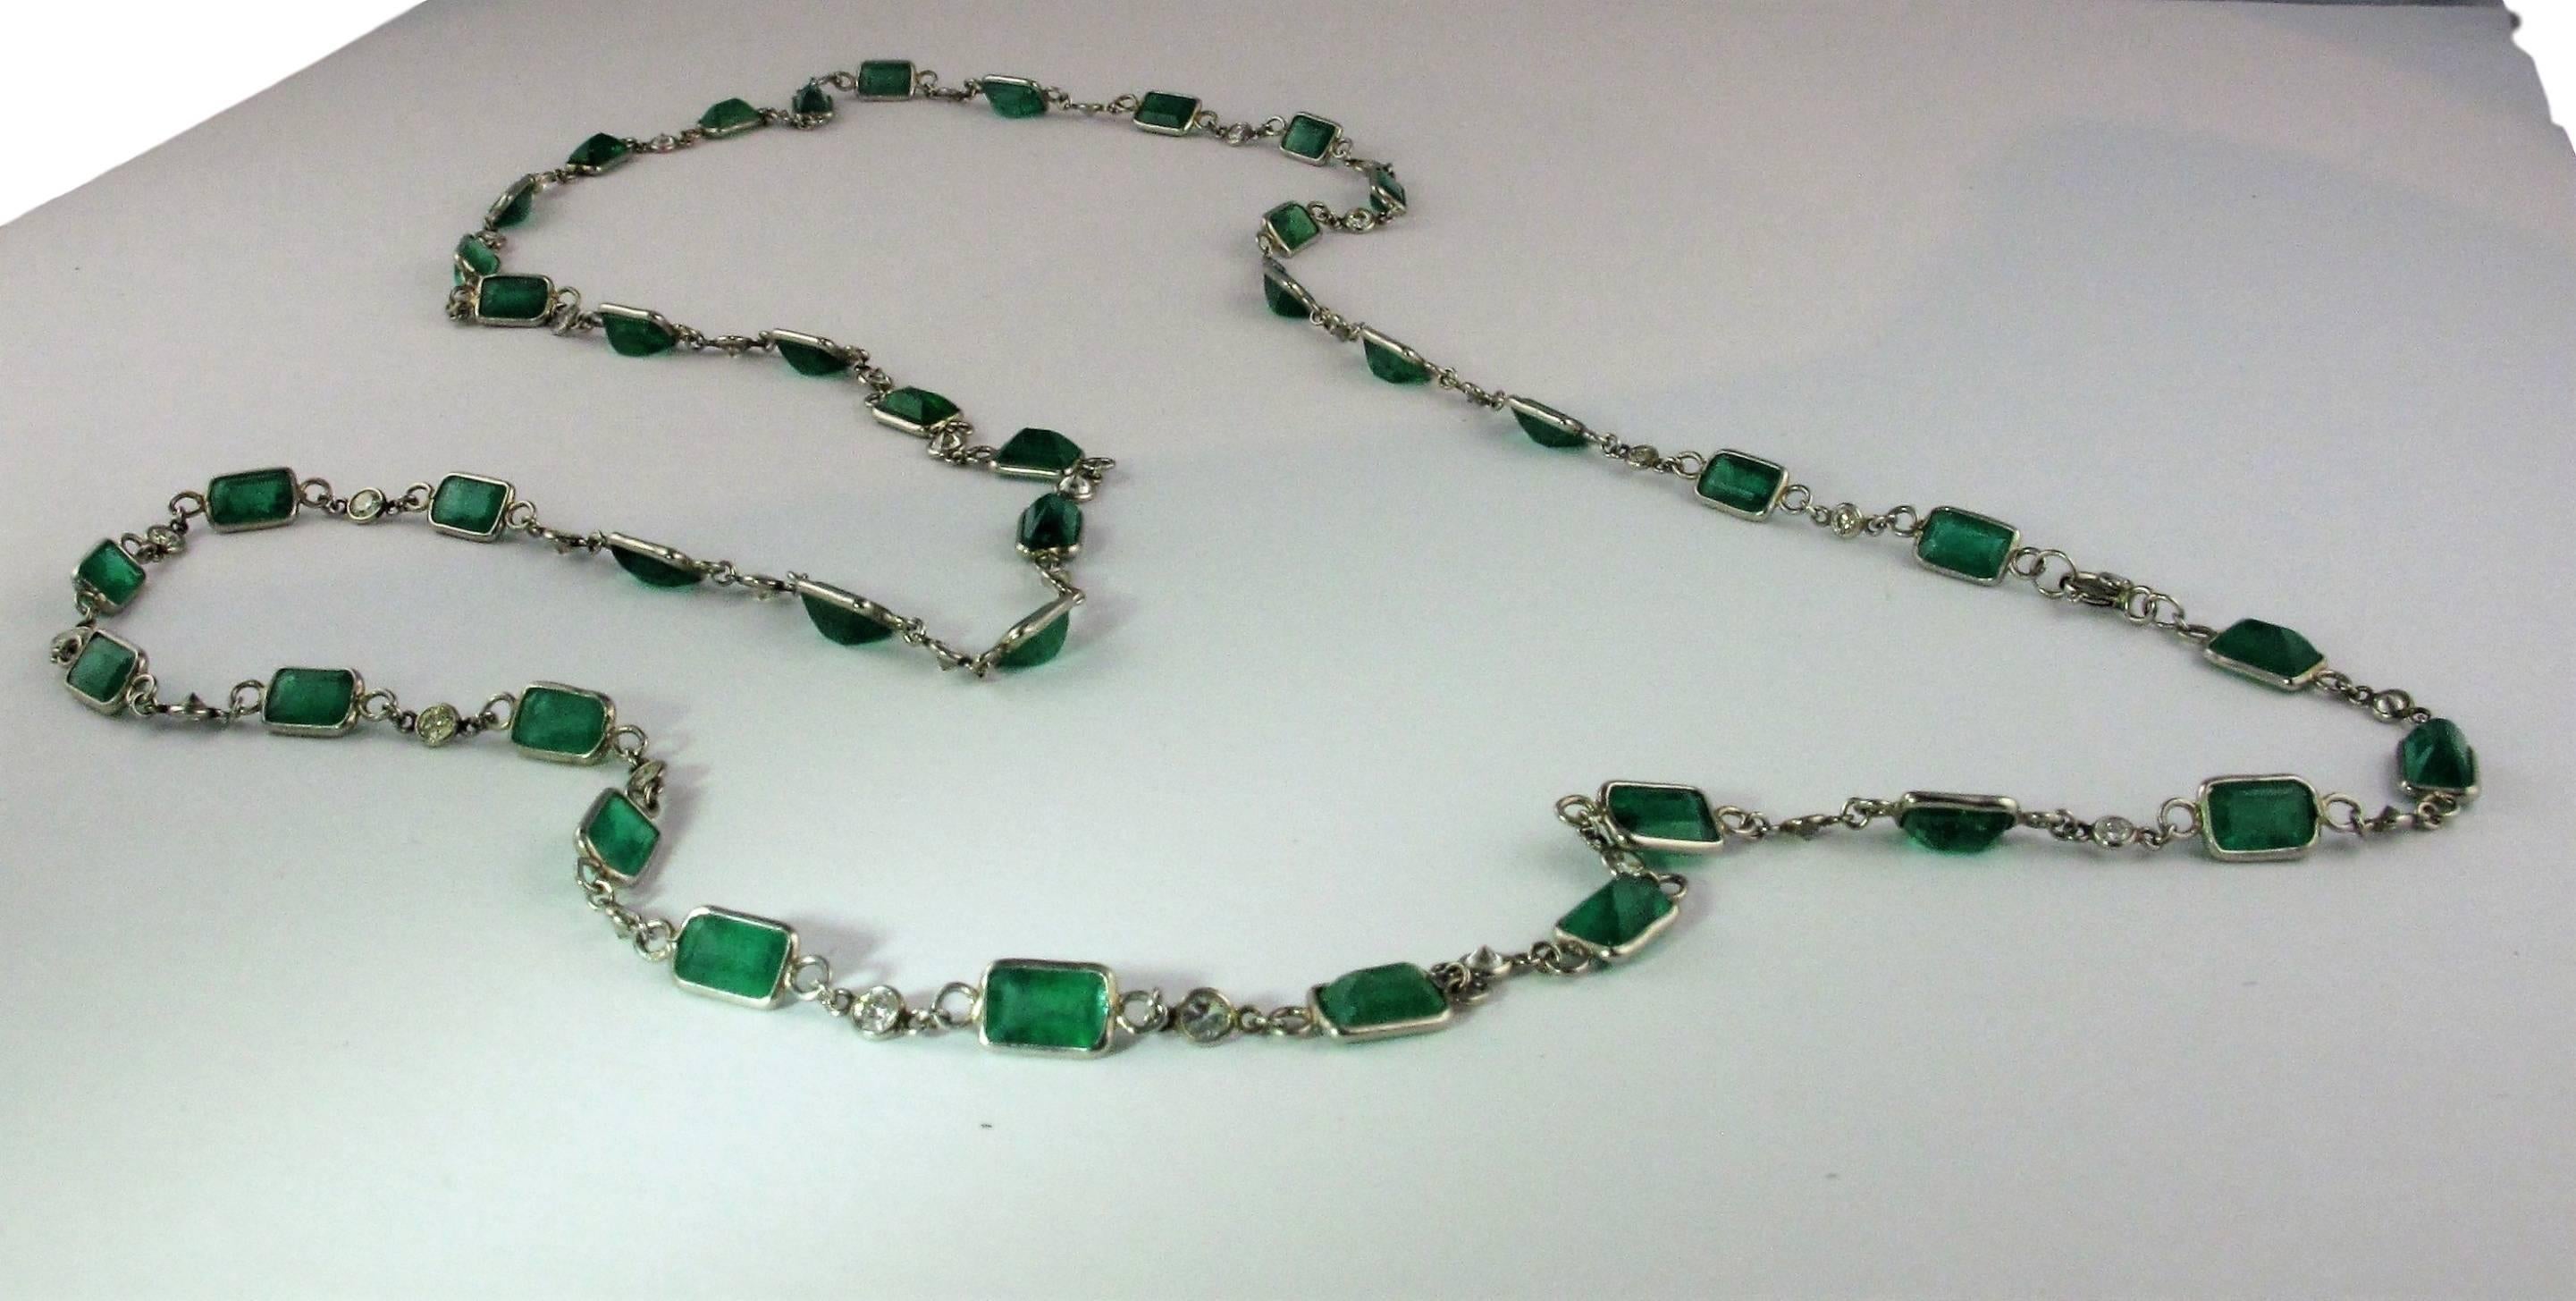 41 Emerald-cut emeralds in platinum setting, each link alternating with a round brilliant-cut diamond. 
Estimatedl weight of 41 Emeralds: 19.45 to 21.5 cts. Est weight of 41 round brilliant-cut diamonds: 4.51 cts.
Long chain necklace or 4 row